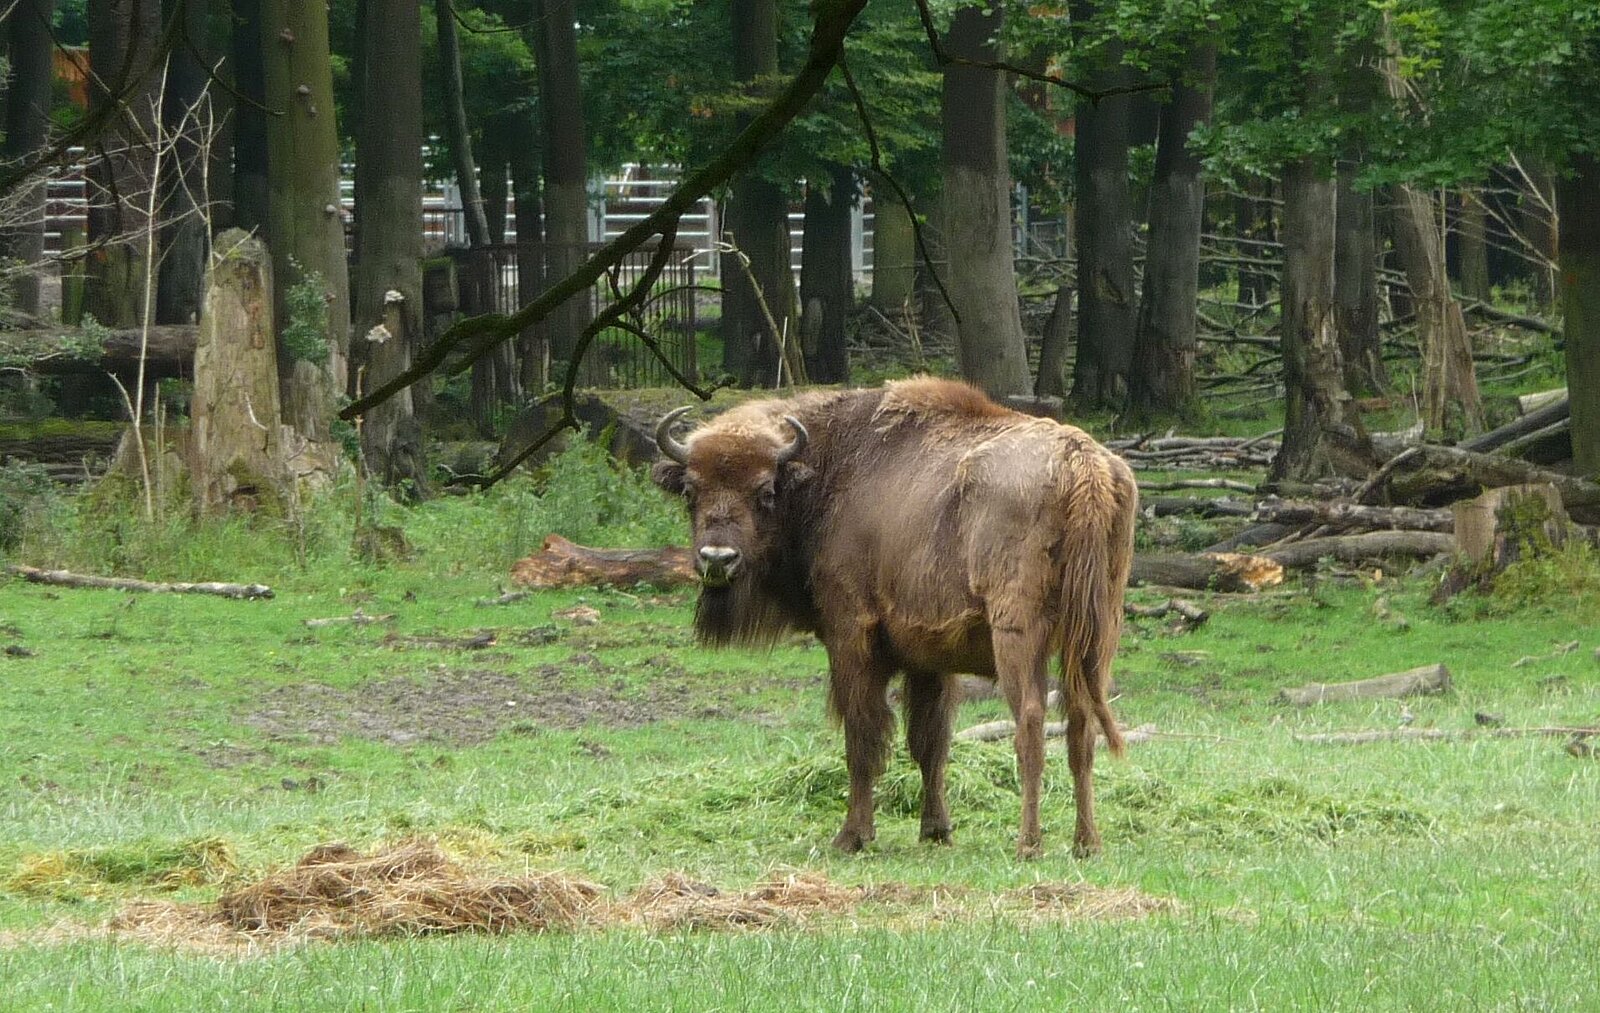 Bison in the game reserve